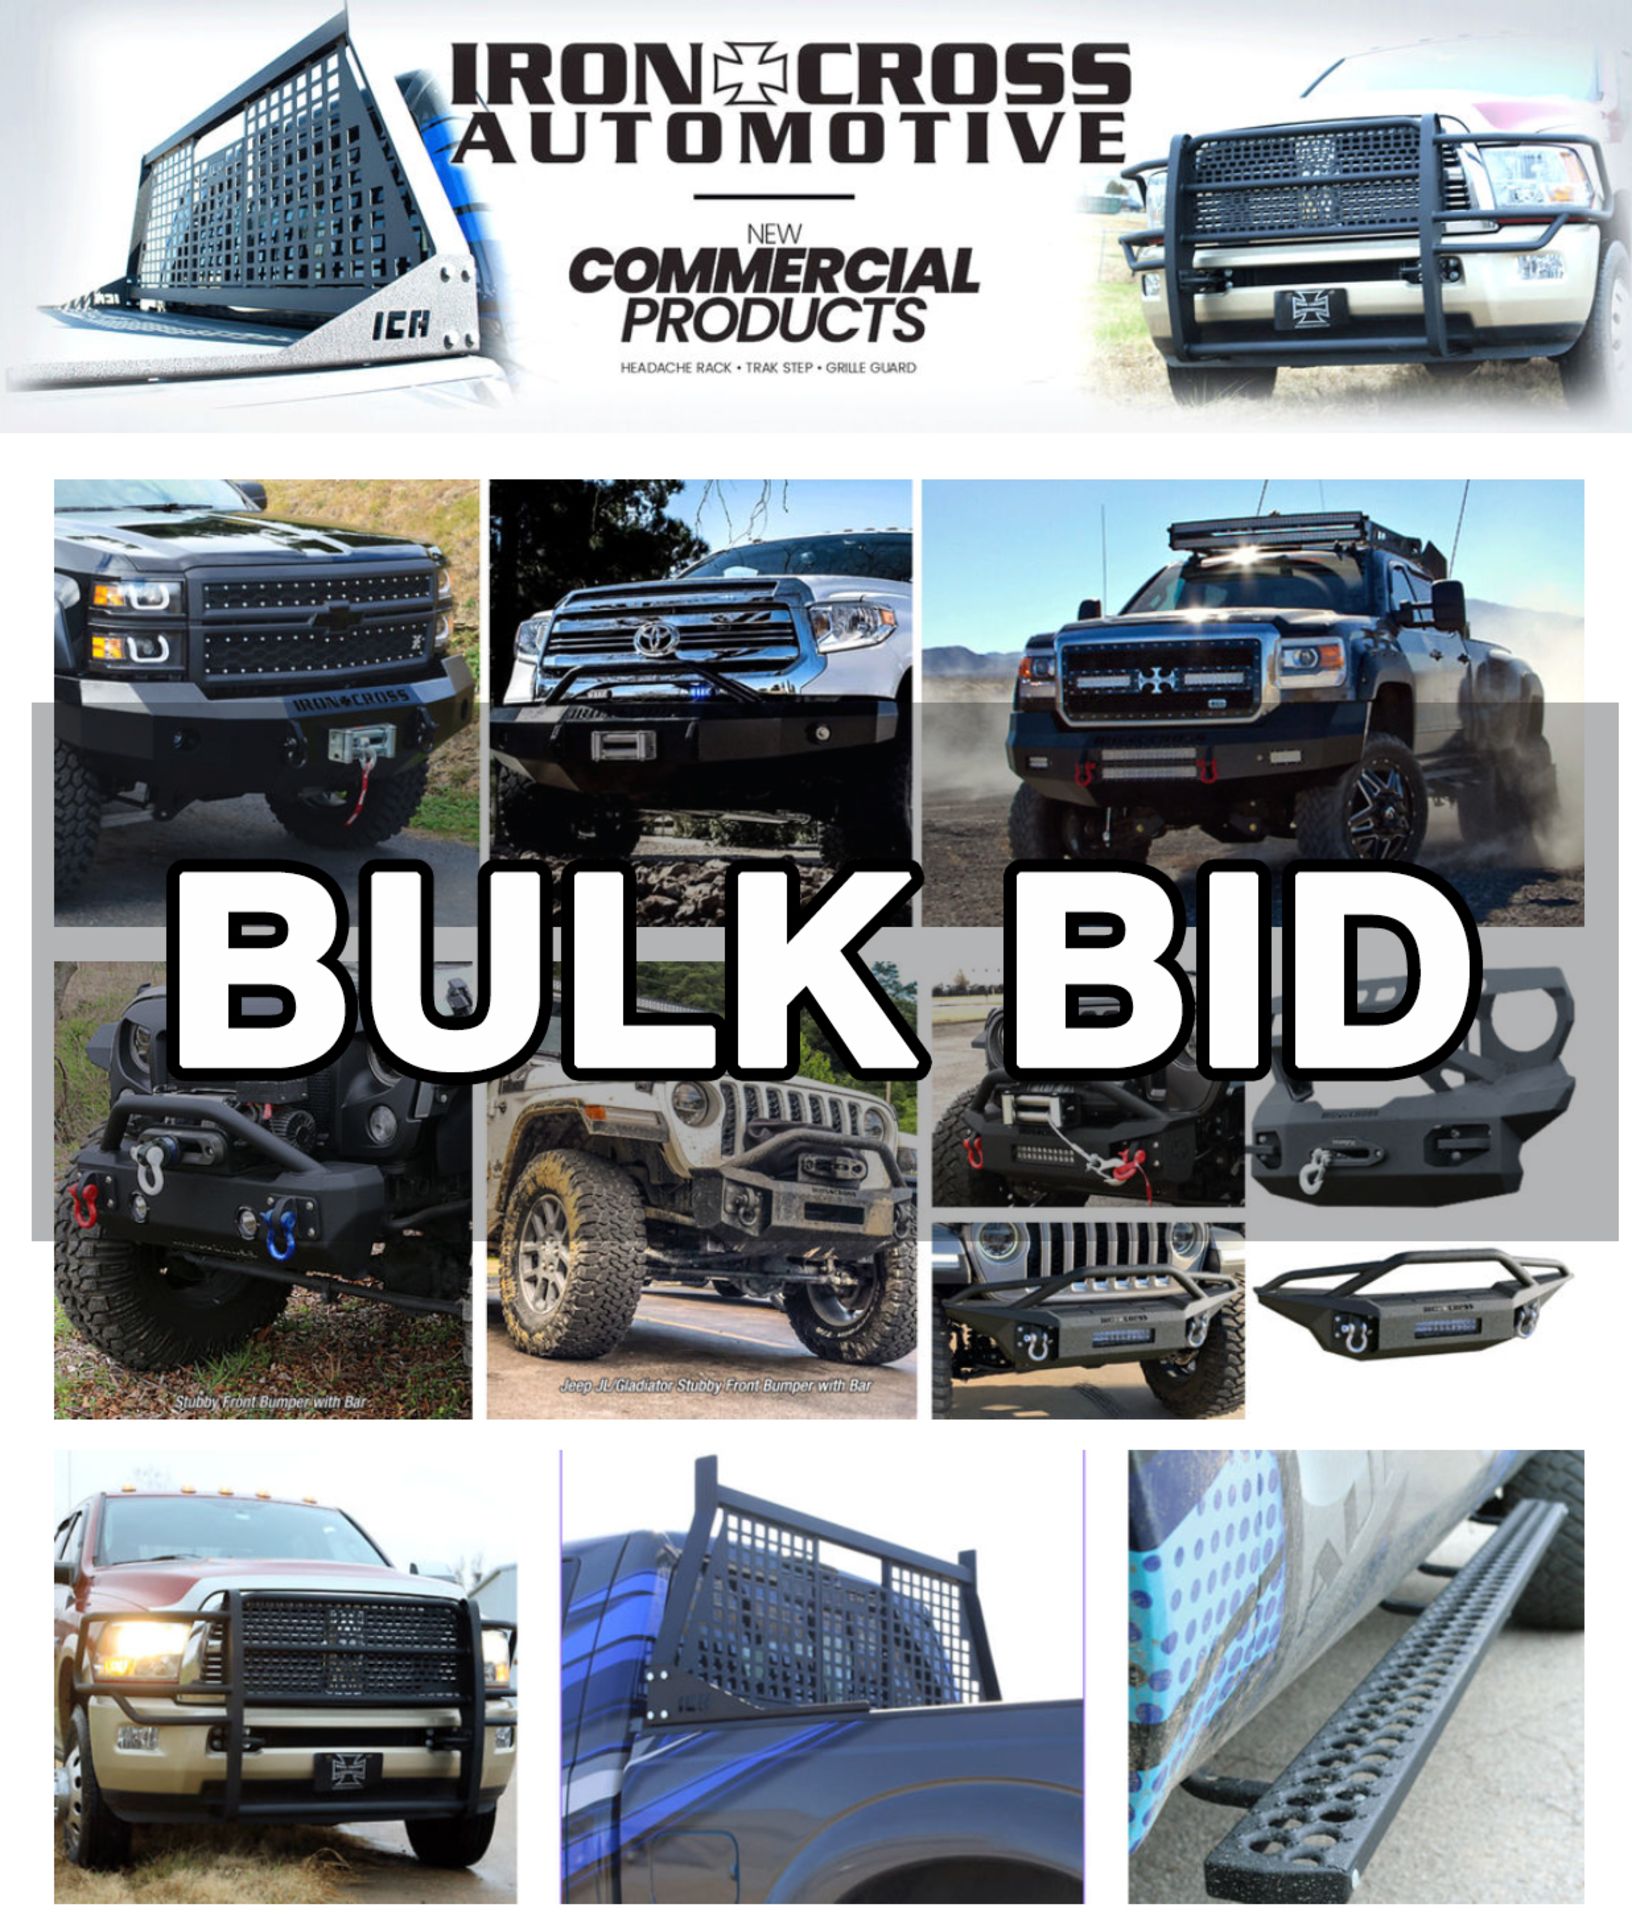 BULK BID - ALL INVENTORY & FINISHED GOODS LOTS 600-714, DOES NOT INCLUDE LOT 713